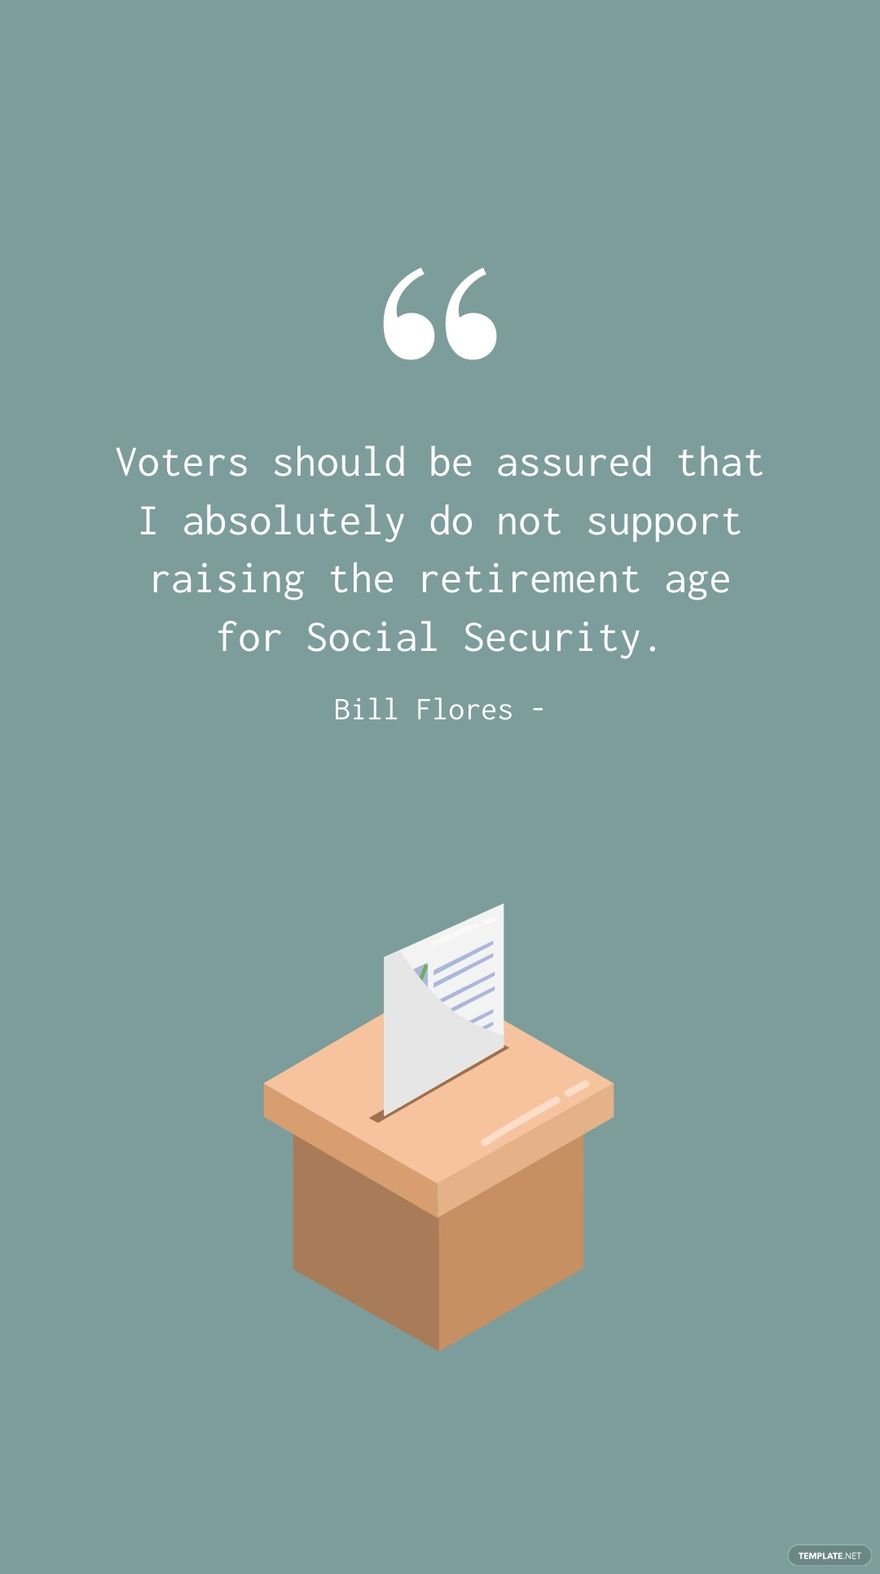 Free Bill Flores - Voters should be assured that I absolutely do not support raising the retirement age for Social Security. in JPG